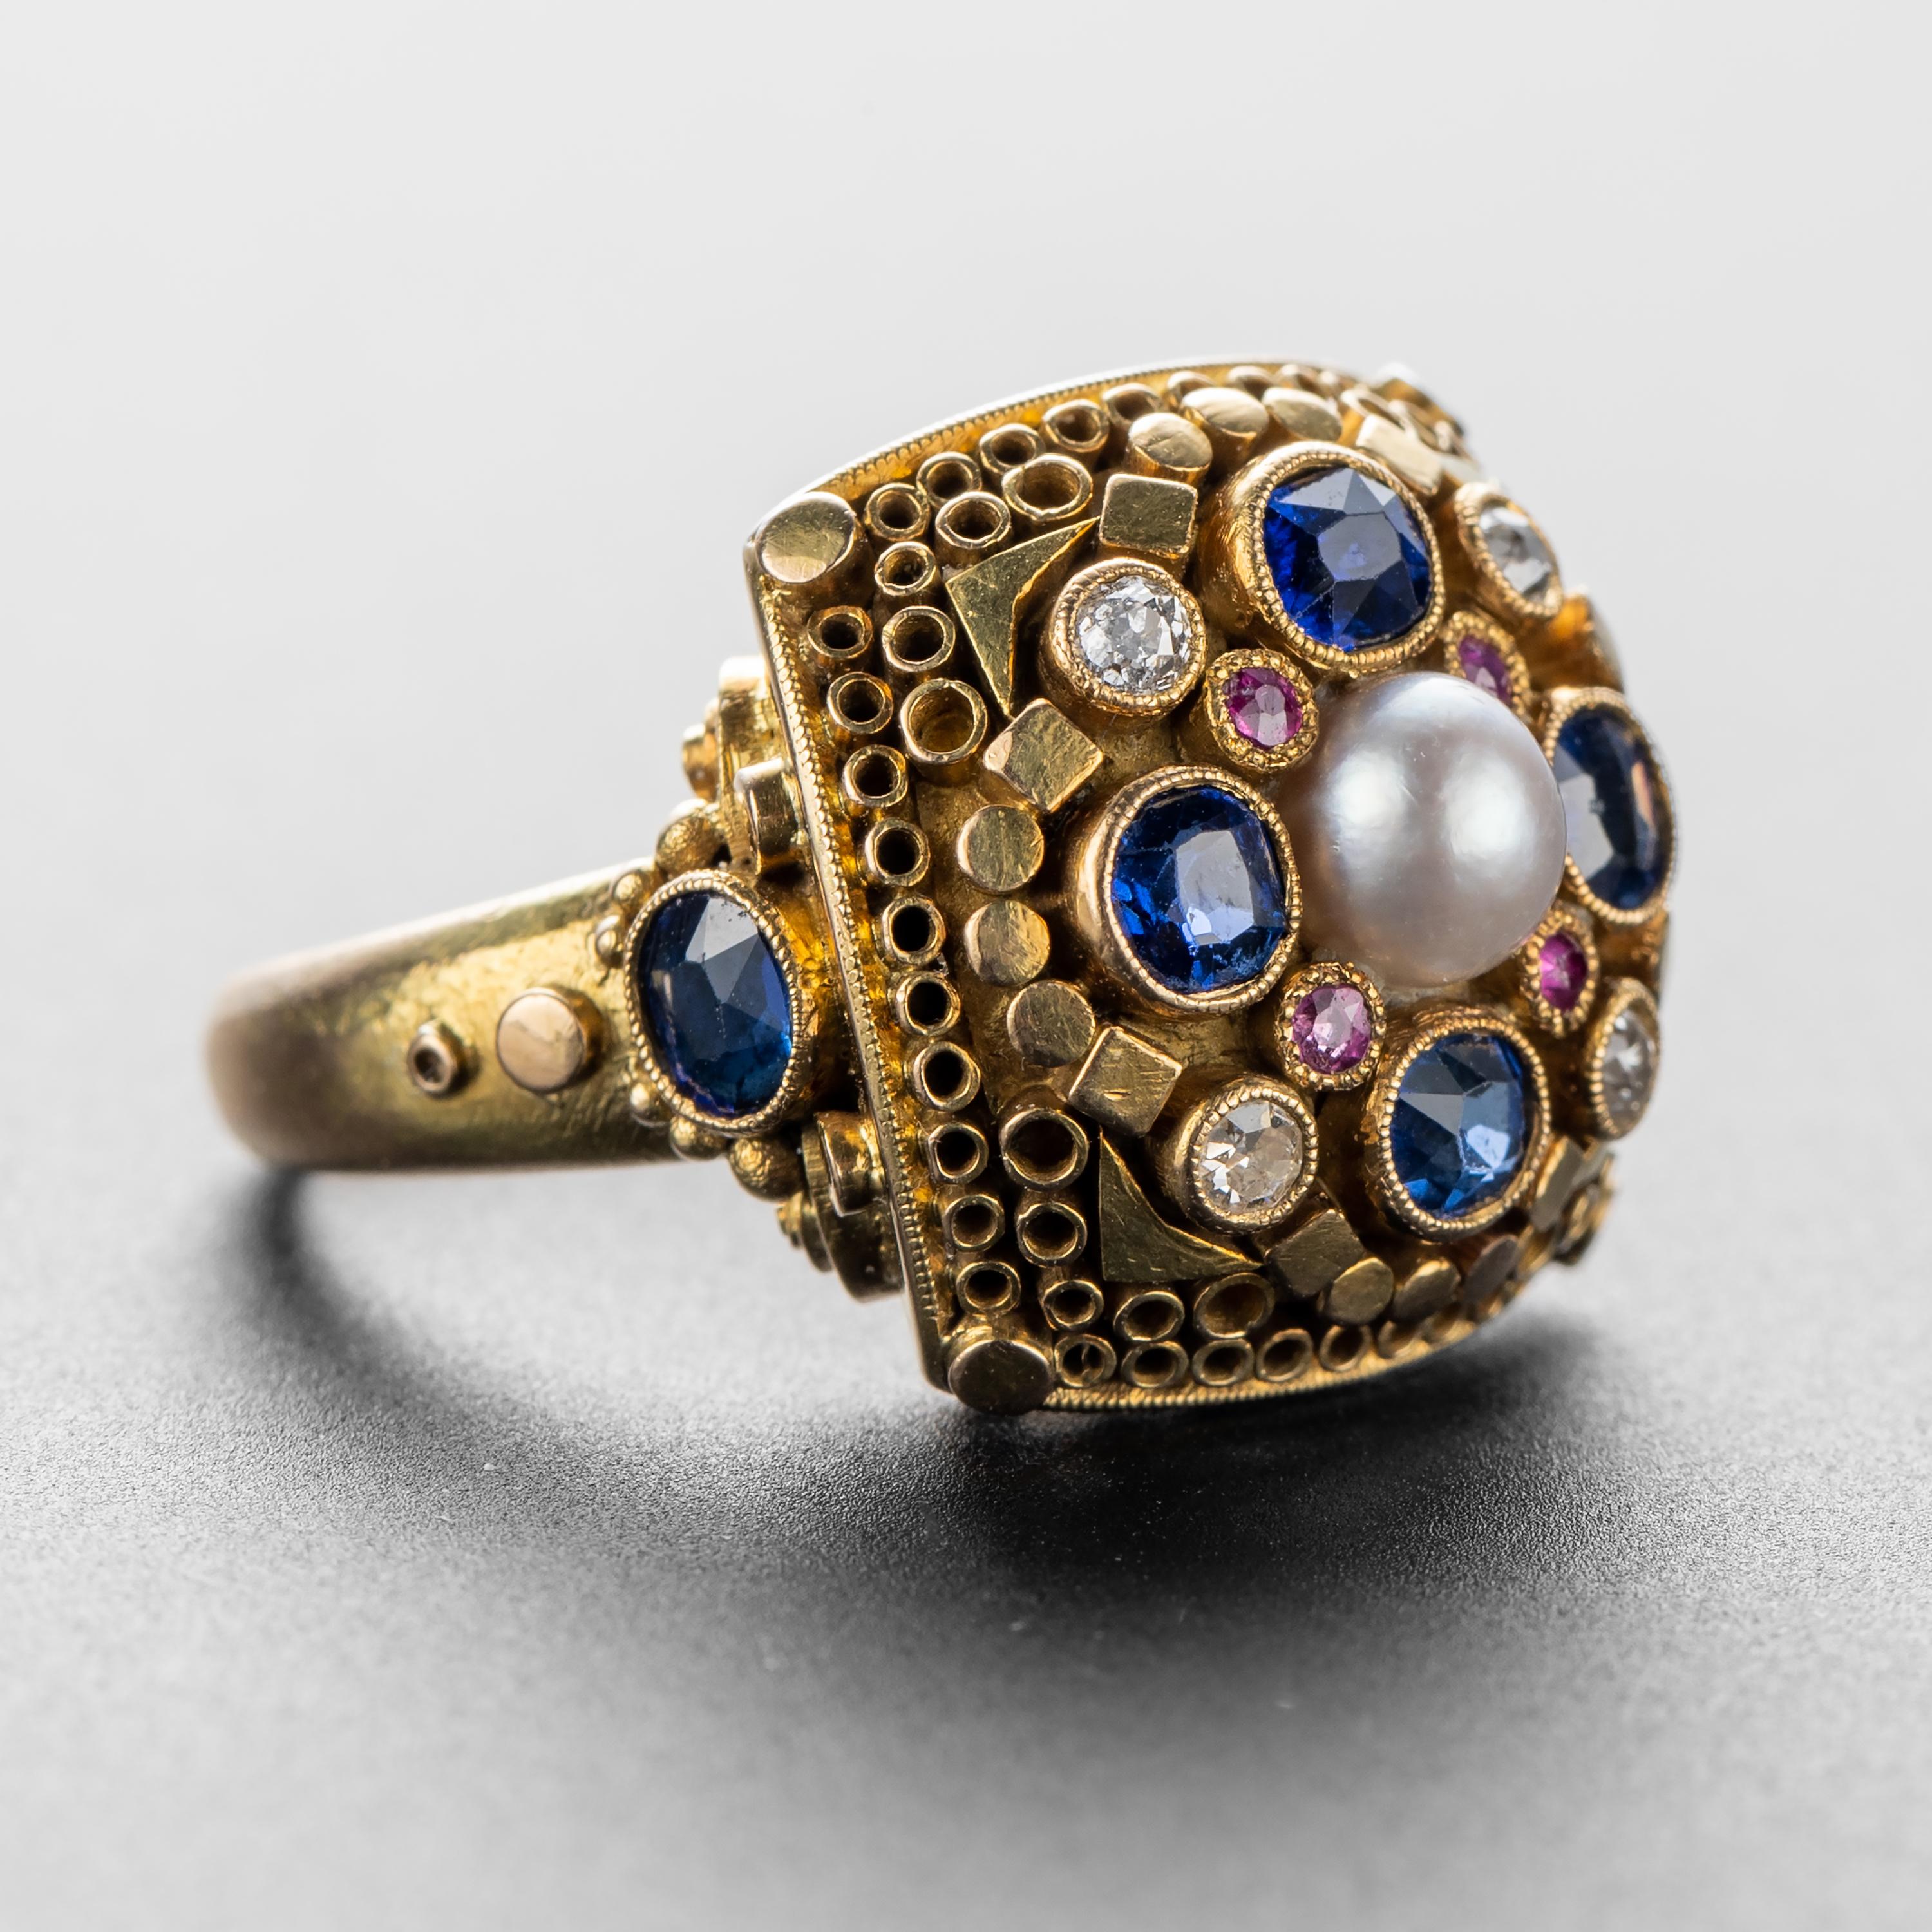 This original Elmar Seidler ring is composed of high-karat gold (at least 18K) that has been intricately and meticulously worked by Seidler to create a ring that defies categorization. Small geometric forms adorn the face of the ring, granulation